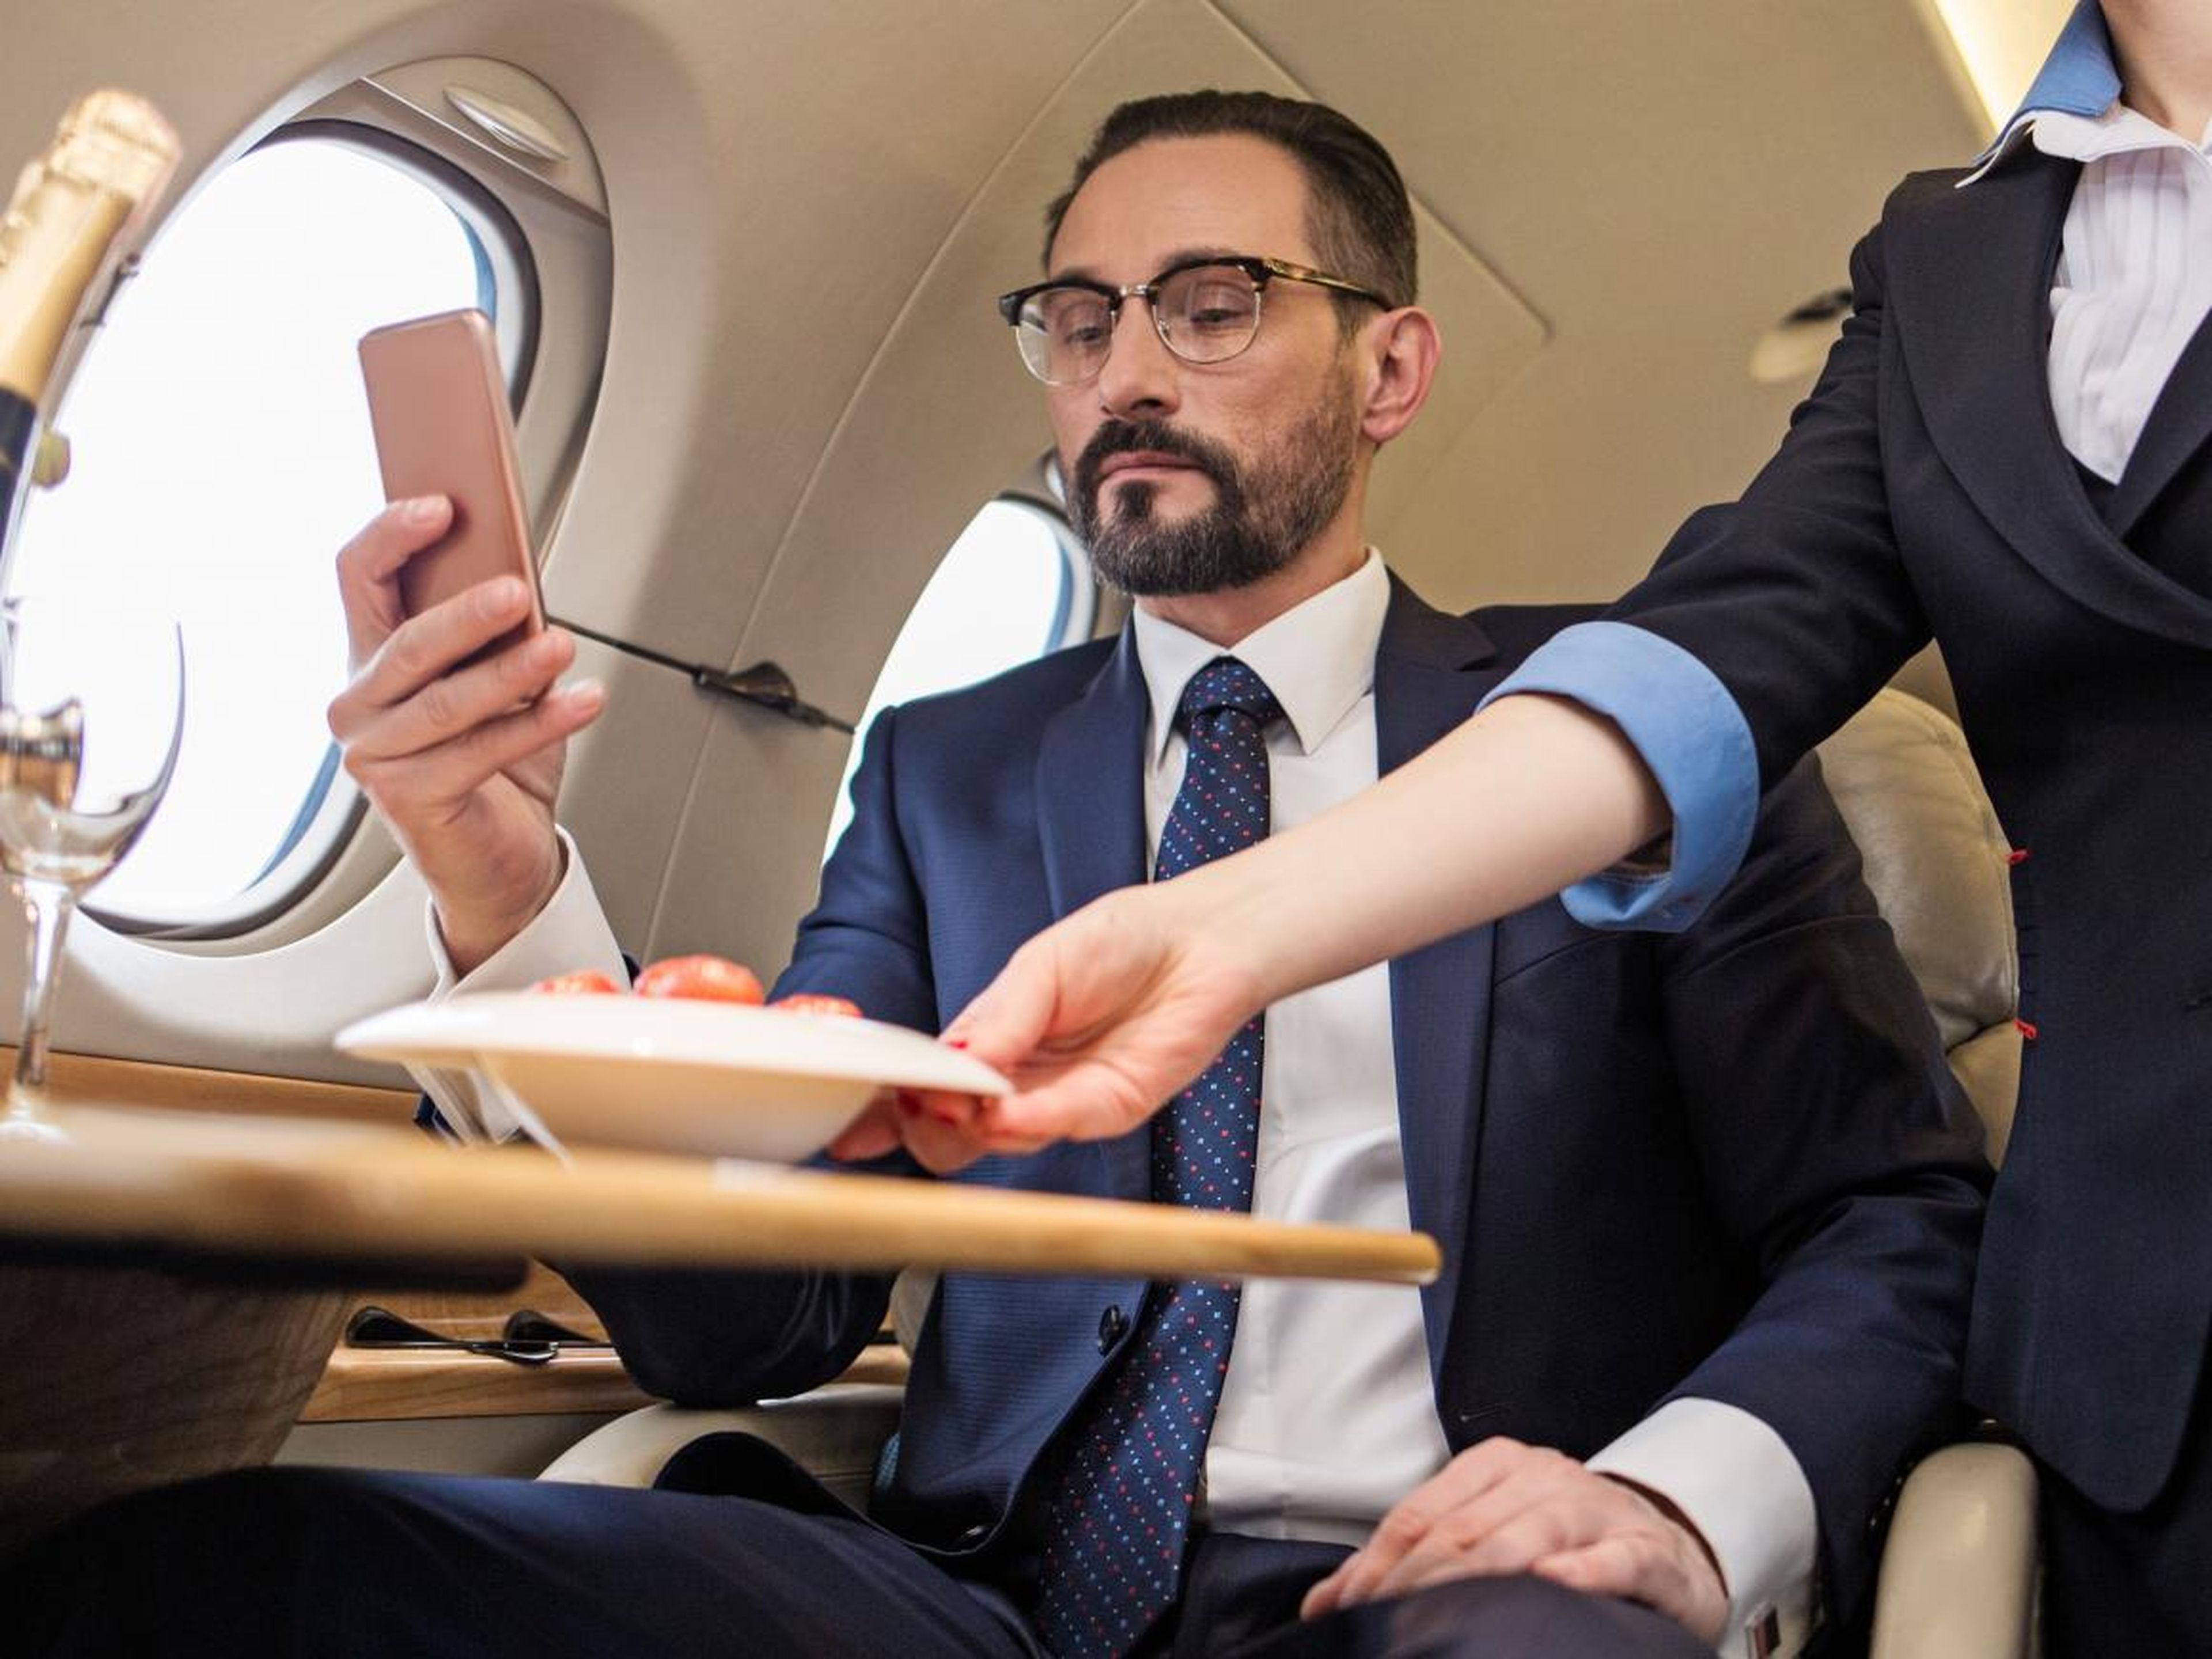 "Fast-charging USB ports for passengers' phones and personal devices are a must," Roth said. "Streaming music or video content throughout the aircraft is becoming almost commonplace today."